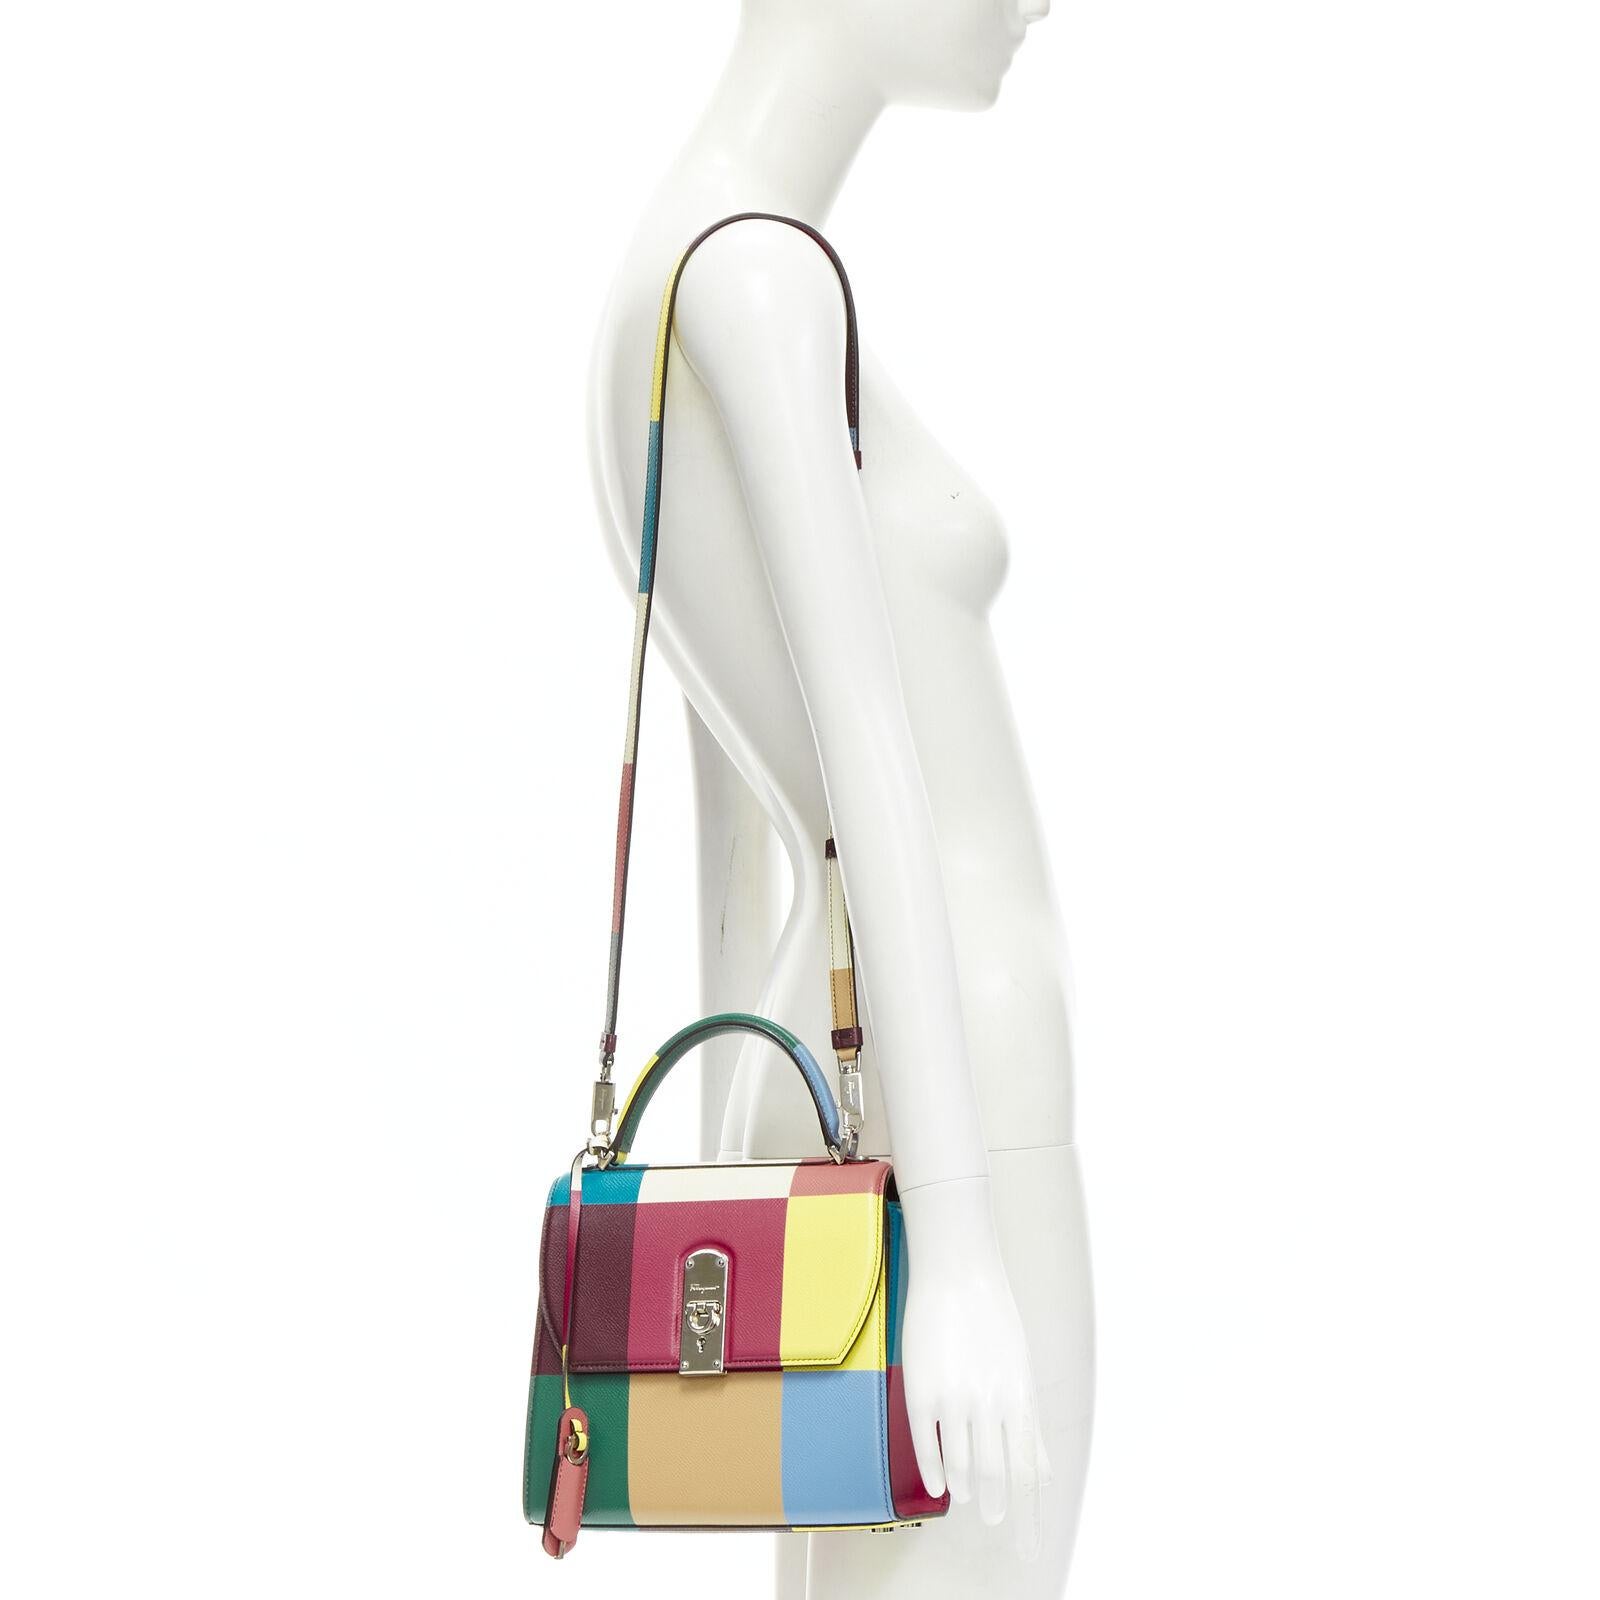 rare SALVATORE FERRAGAMO Boxyz rainbow calf leather turnlock top crossbody bag
Reference: TGAS/C01524
Brand: Salvatore Ferragamo
Model: Boxyz
Material: Leather
Color: Multicolour
Pattern: Checkered
Closure: Turnlock
Lining: Leather
Made in: